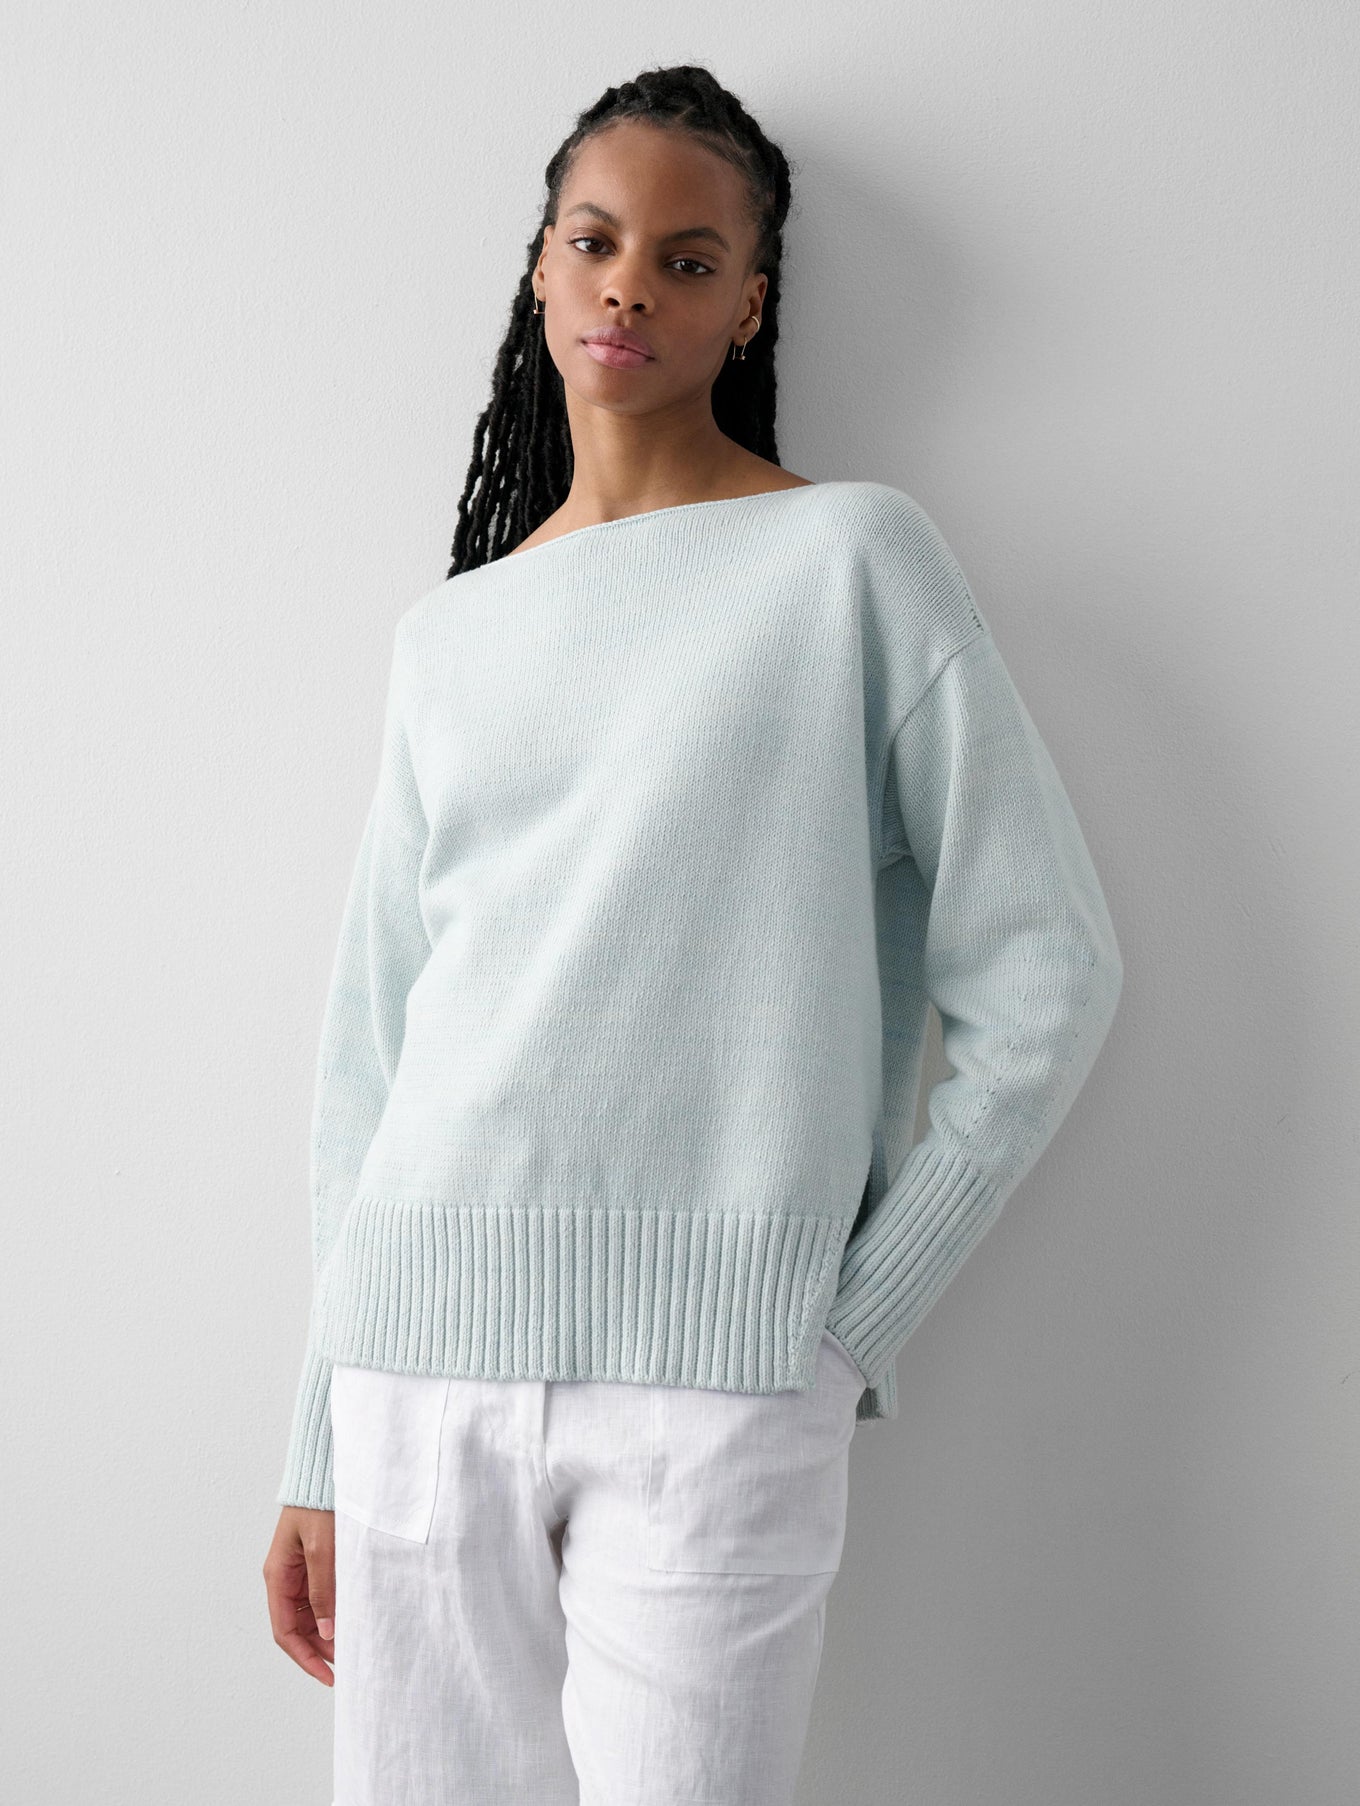 Cotton Boatneck Sweater